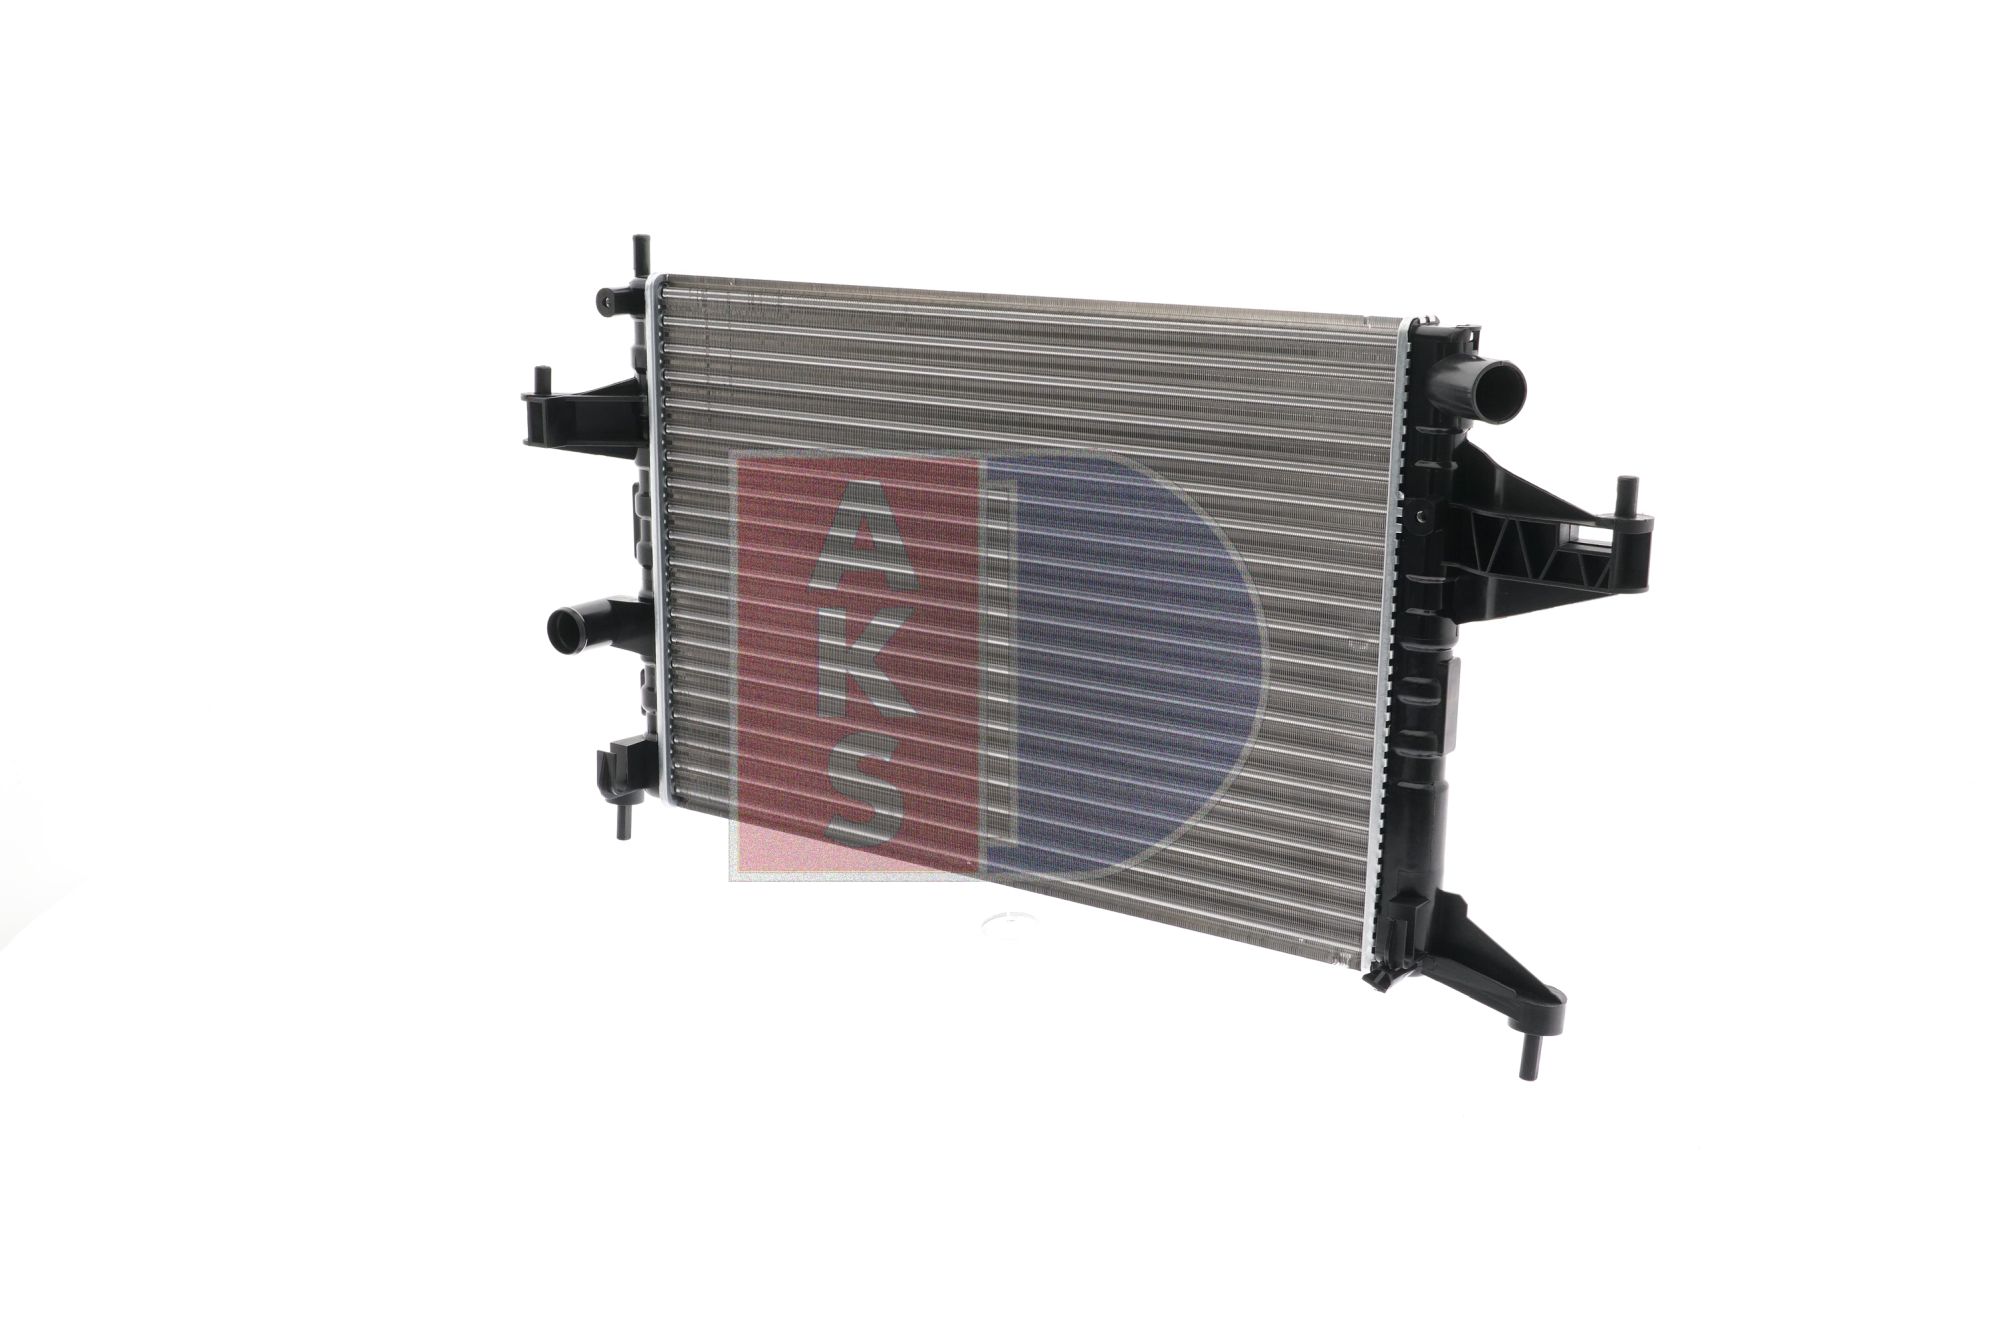 AKS DASIS 150013N Engine radiator 540 x 358 x 26 mm, Mechanically jointed cooling fins